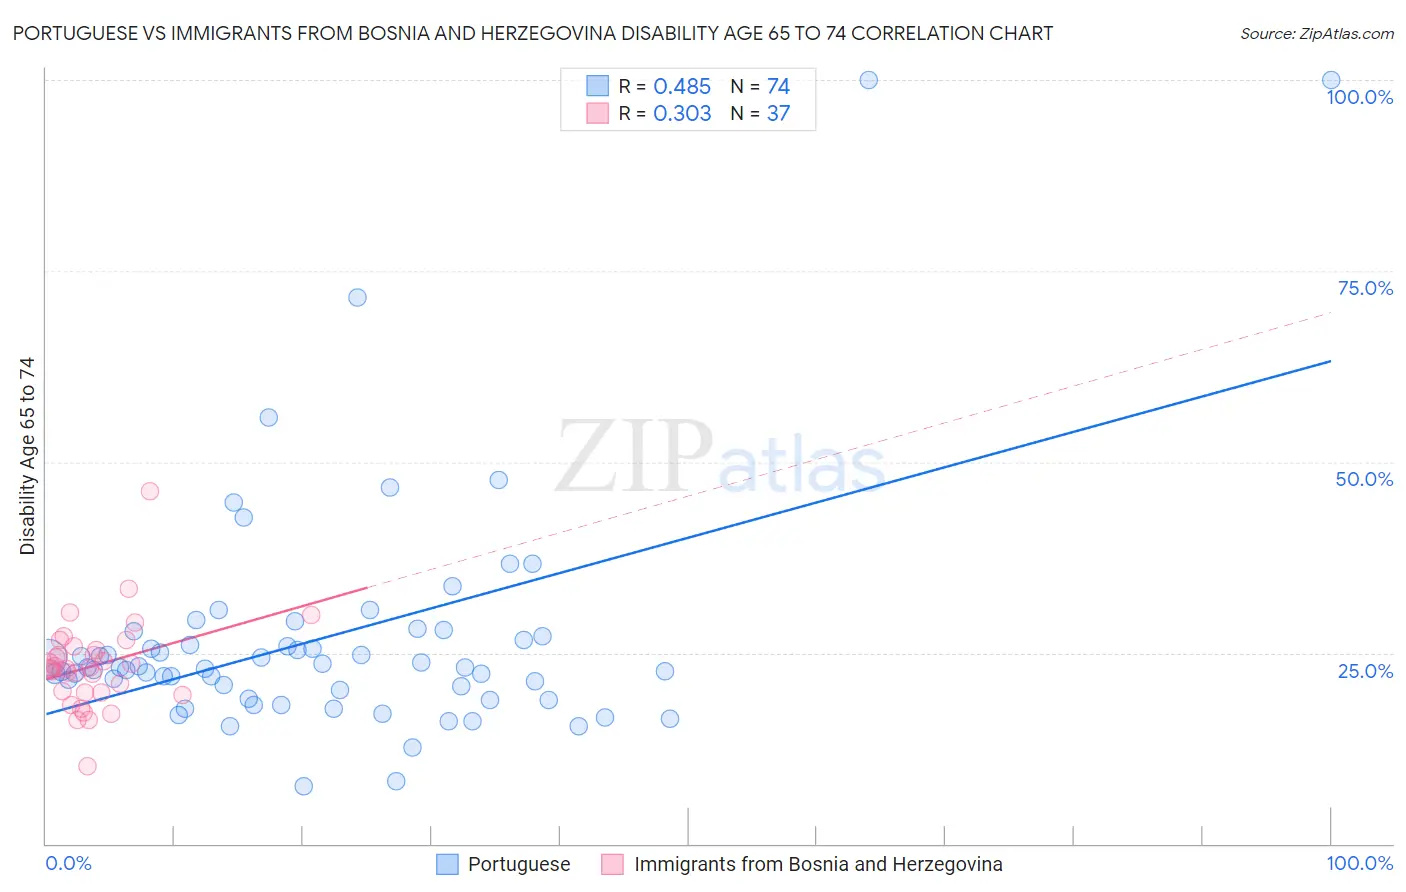 Portuguese vs Immigrants from Bosnia and Herzegovina Disability Age 65 to 74